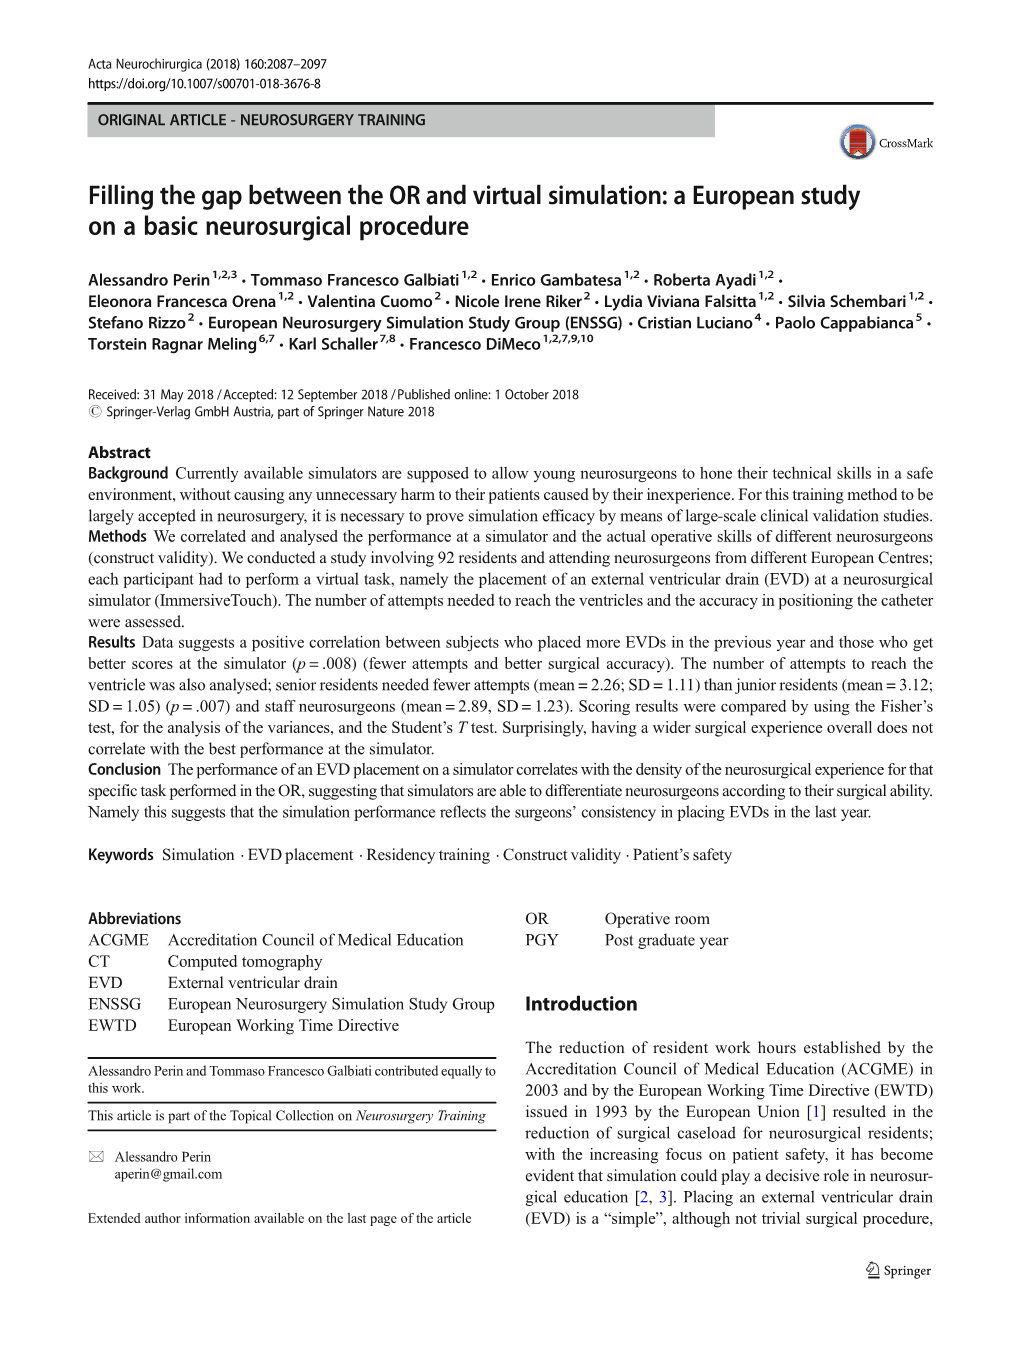 Filling the Gap Between the OR and Virtual Simulation: a European Study on a Basic Neurosurgical Procedure